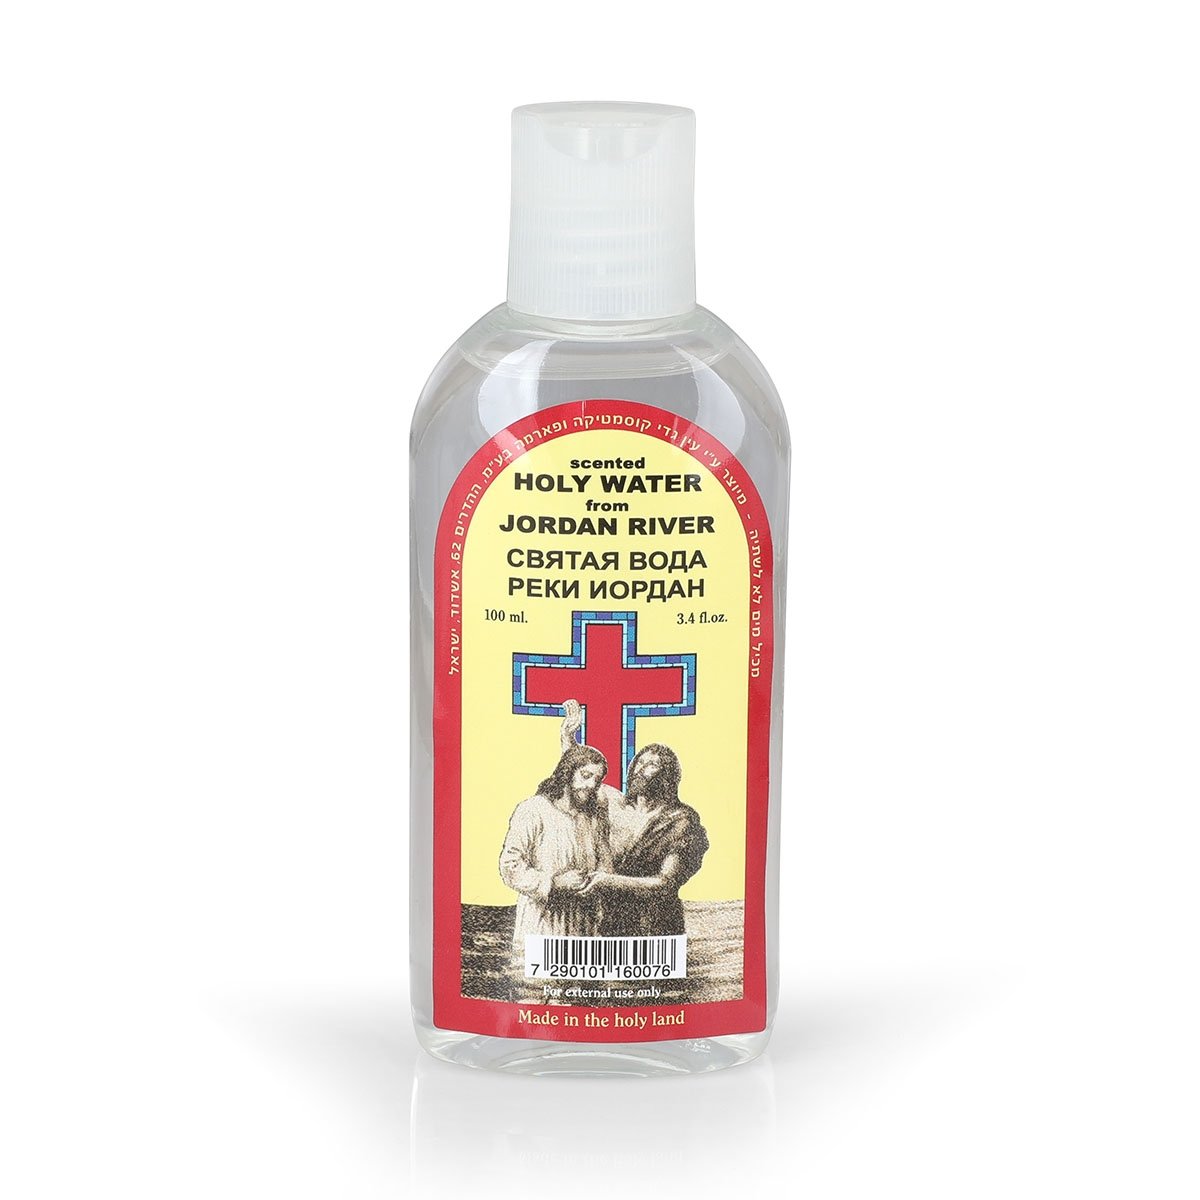 Scented Holy Water From the Jordan River – Cross Baptist (100 ml) - 1